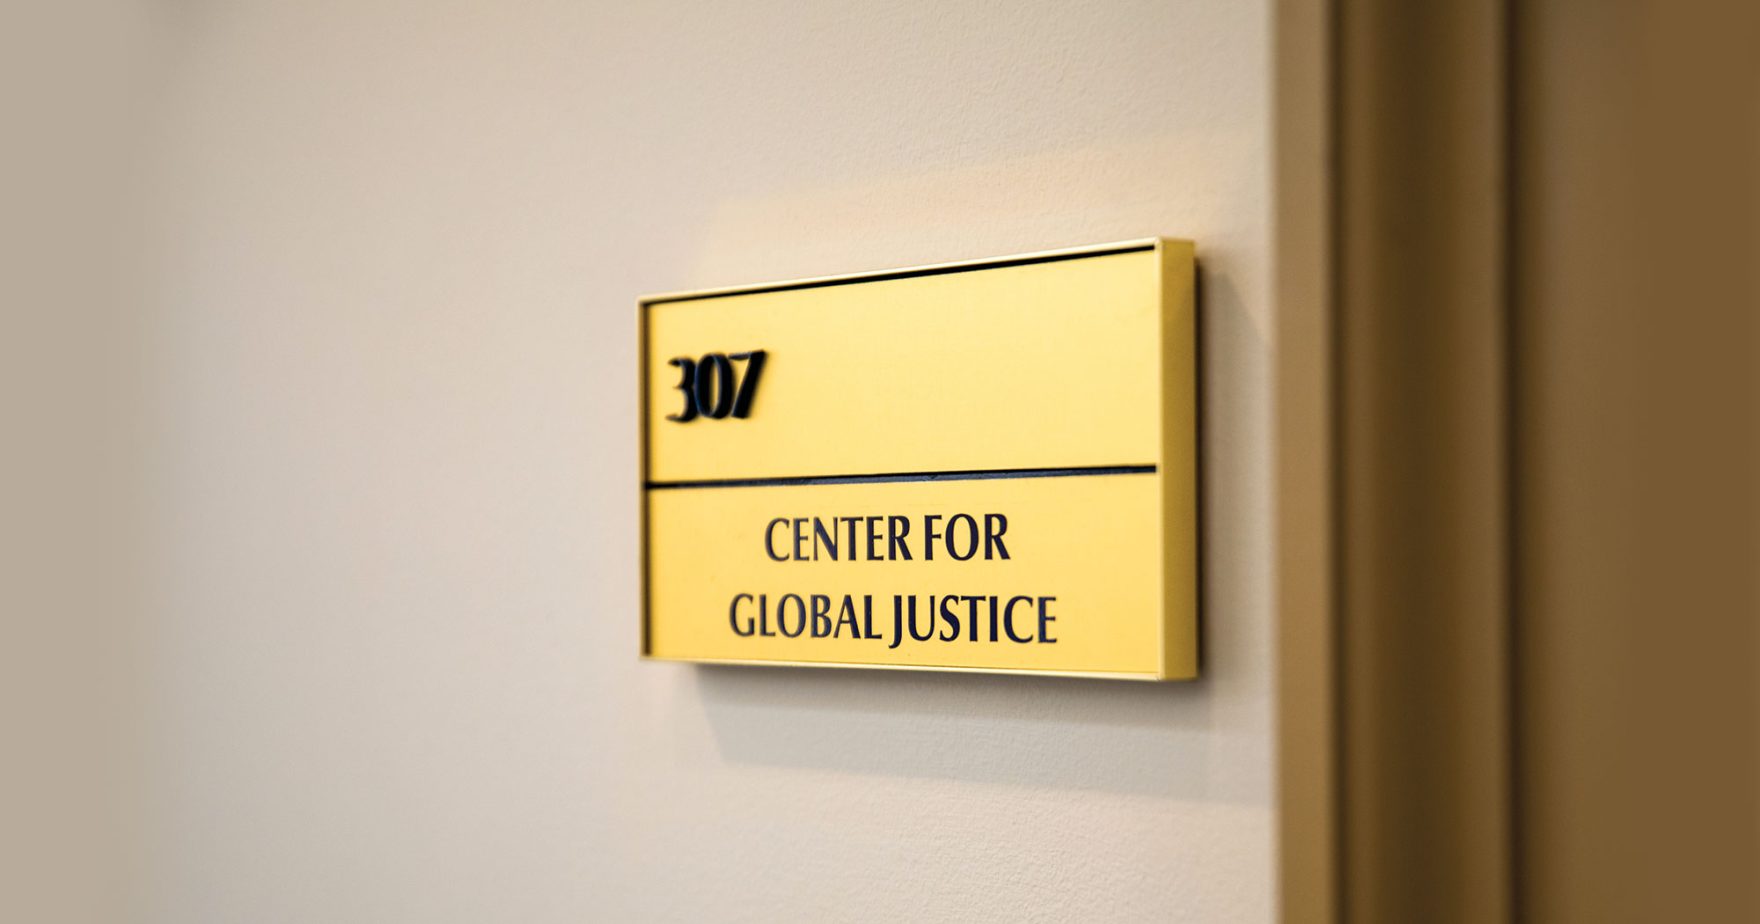 Regent Law's Center for Global Justice, Virginia Beach